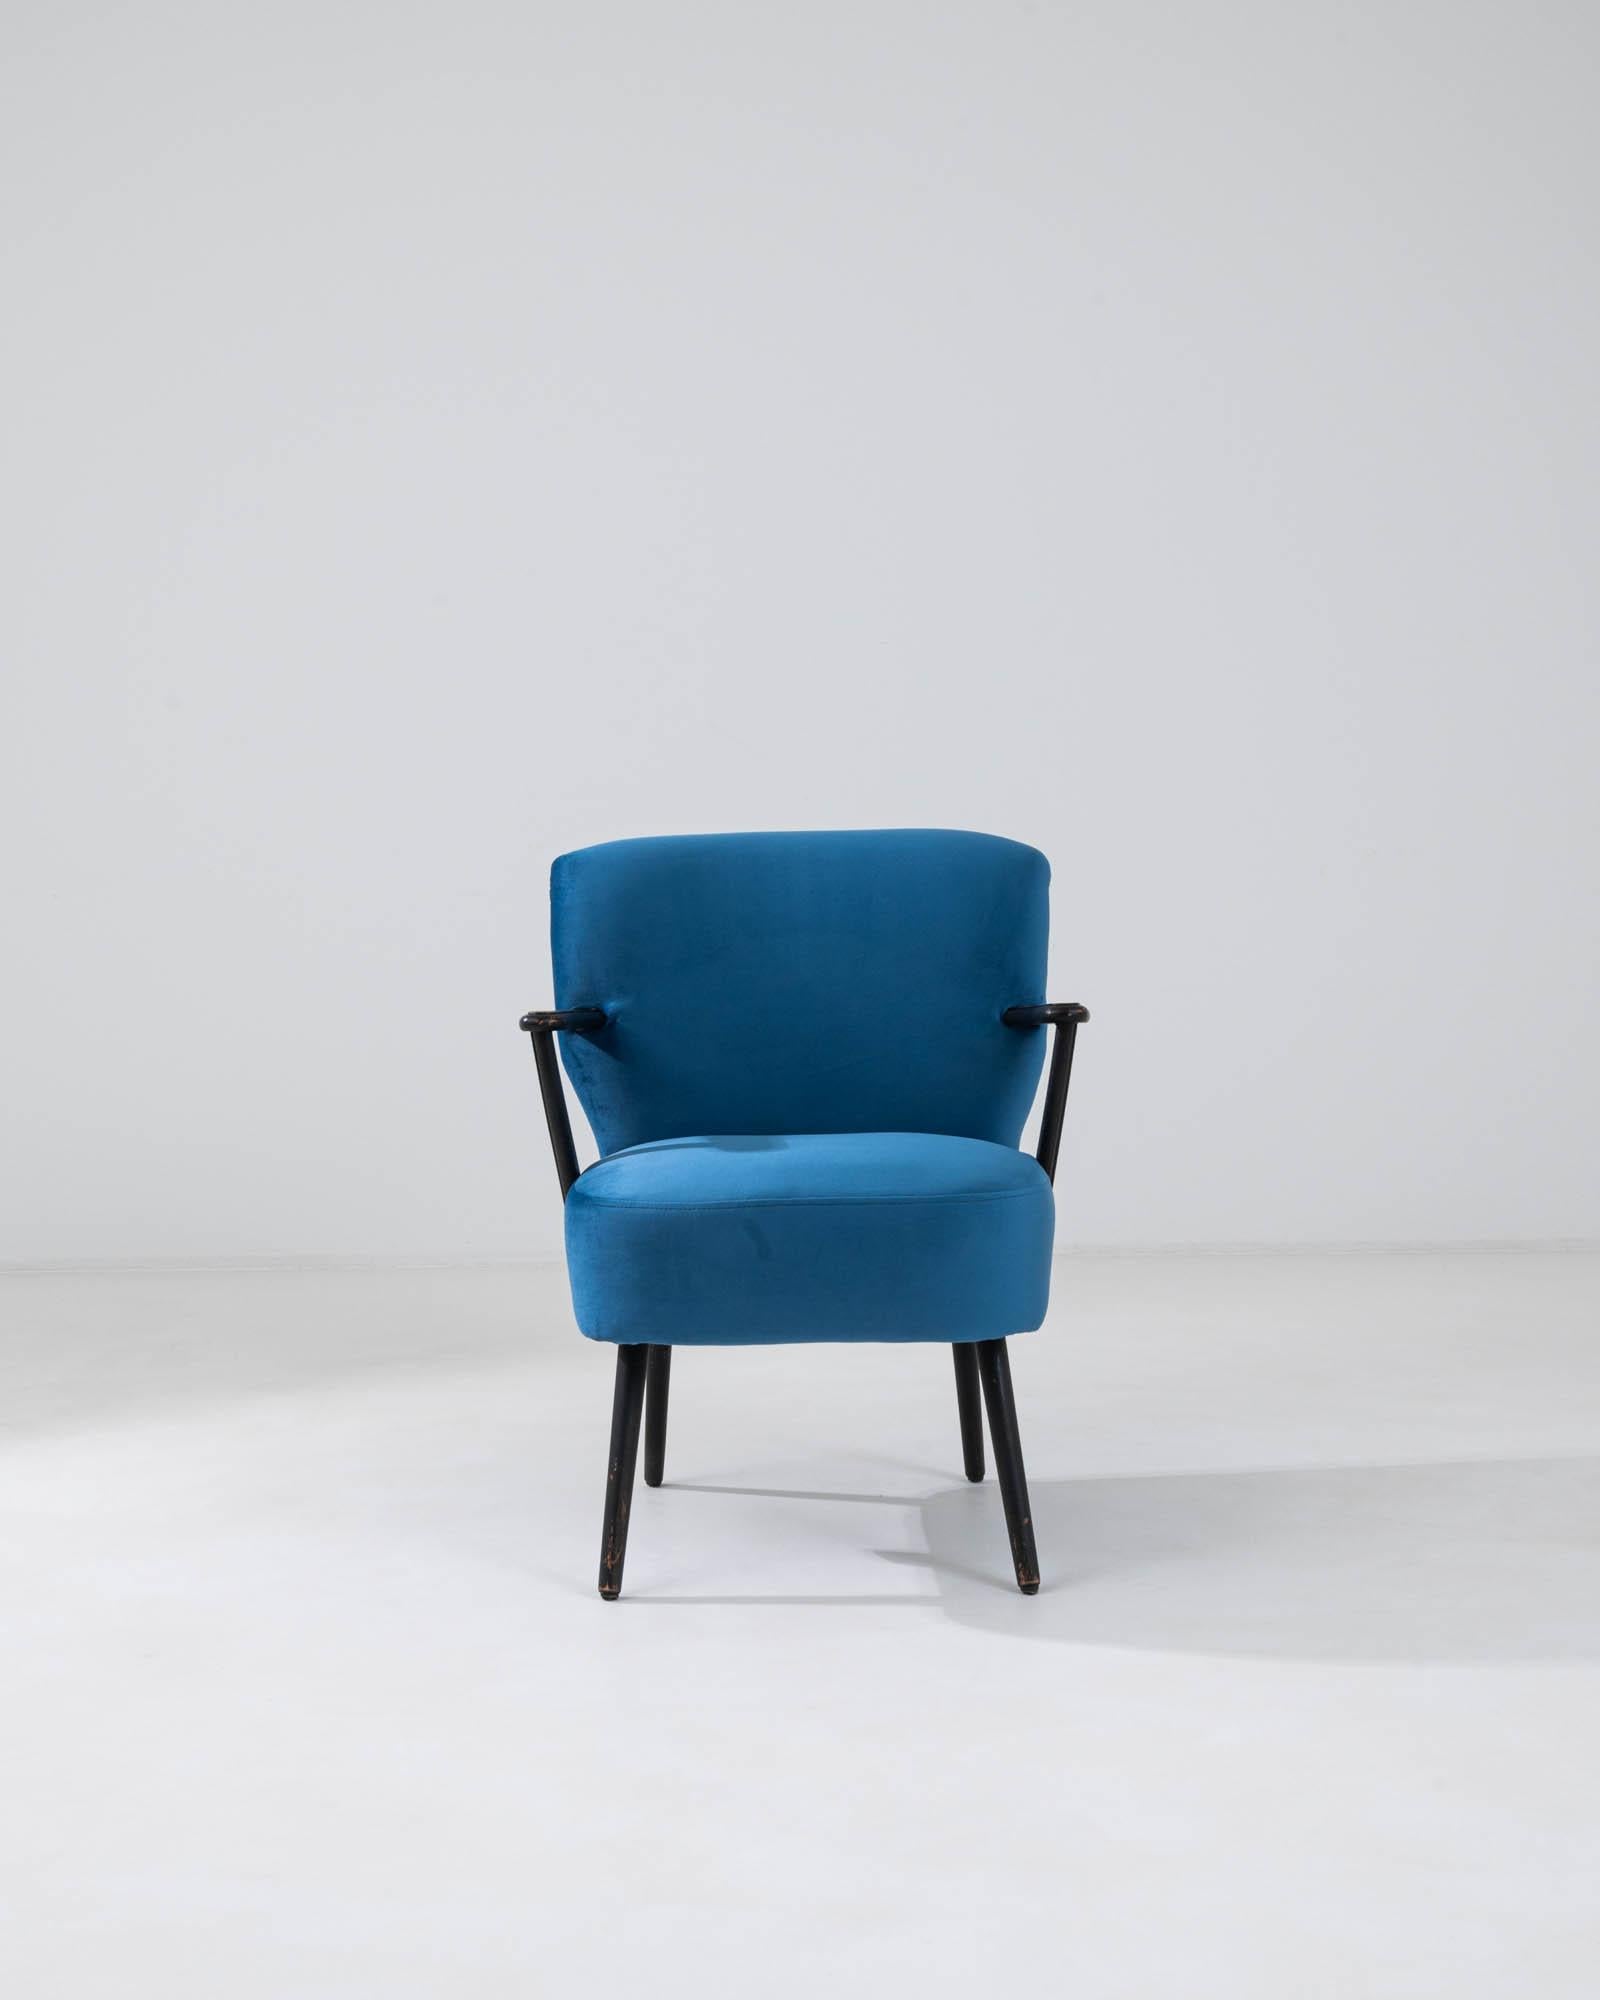 Enliven your space with the vibrant allure of this 20th Century Danish upholstered armchair, a piece that artfully combines mid-century design with contemporary comfort. Cloaked in a striking shade of blue, the chair's fabric is both an aesthetic